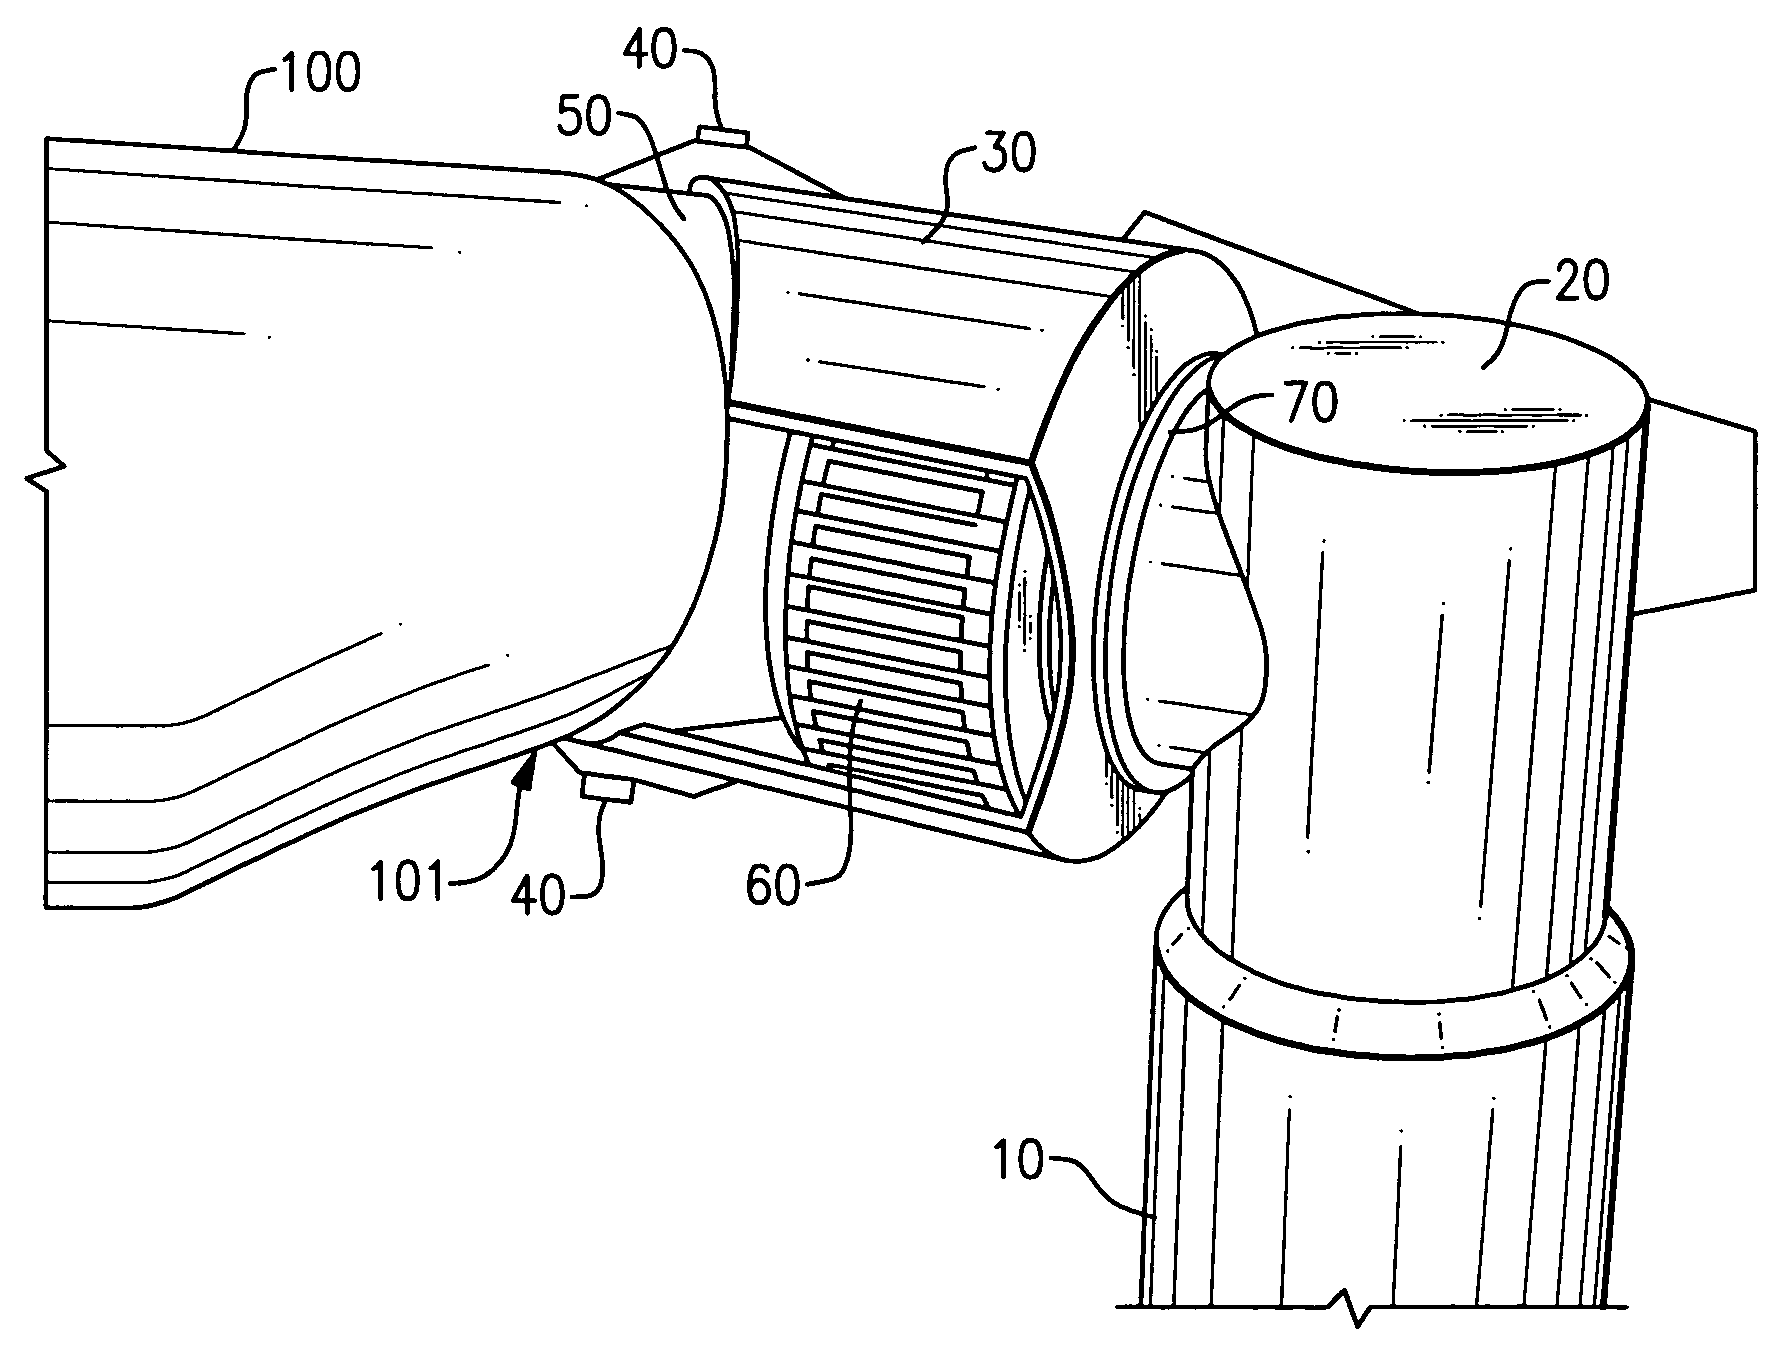 Wind-turbine with load-carrying skin